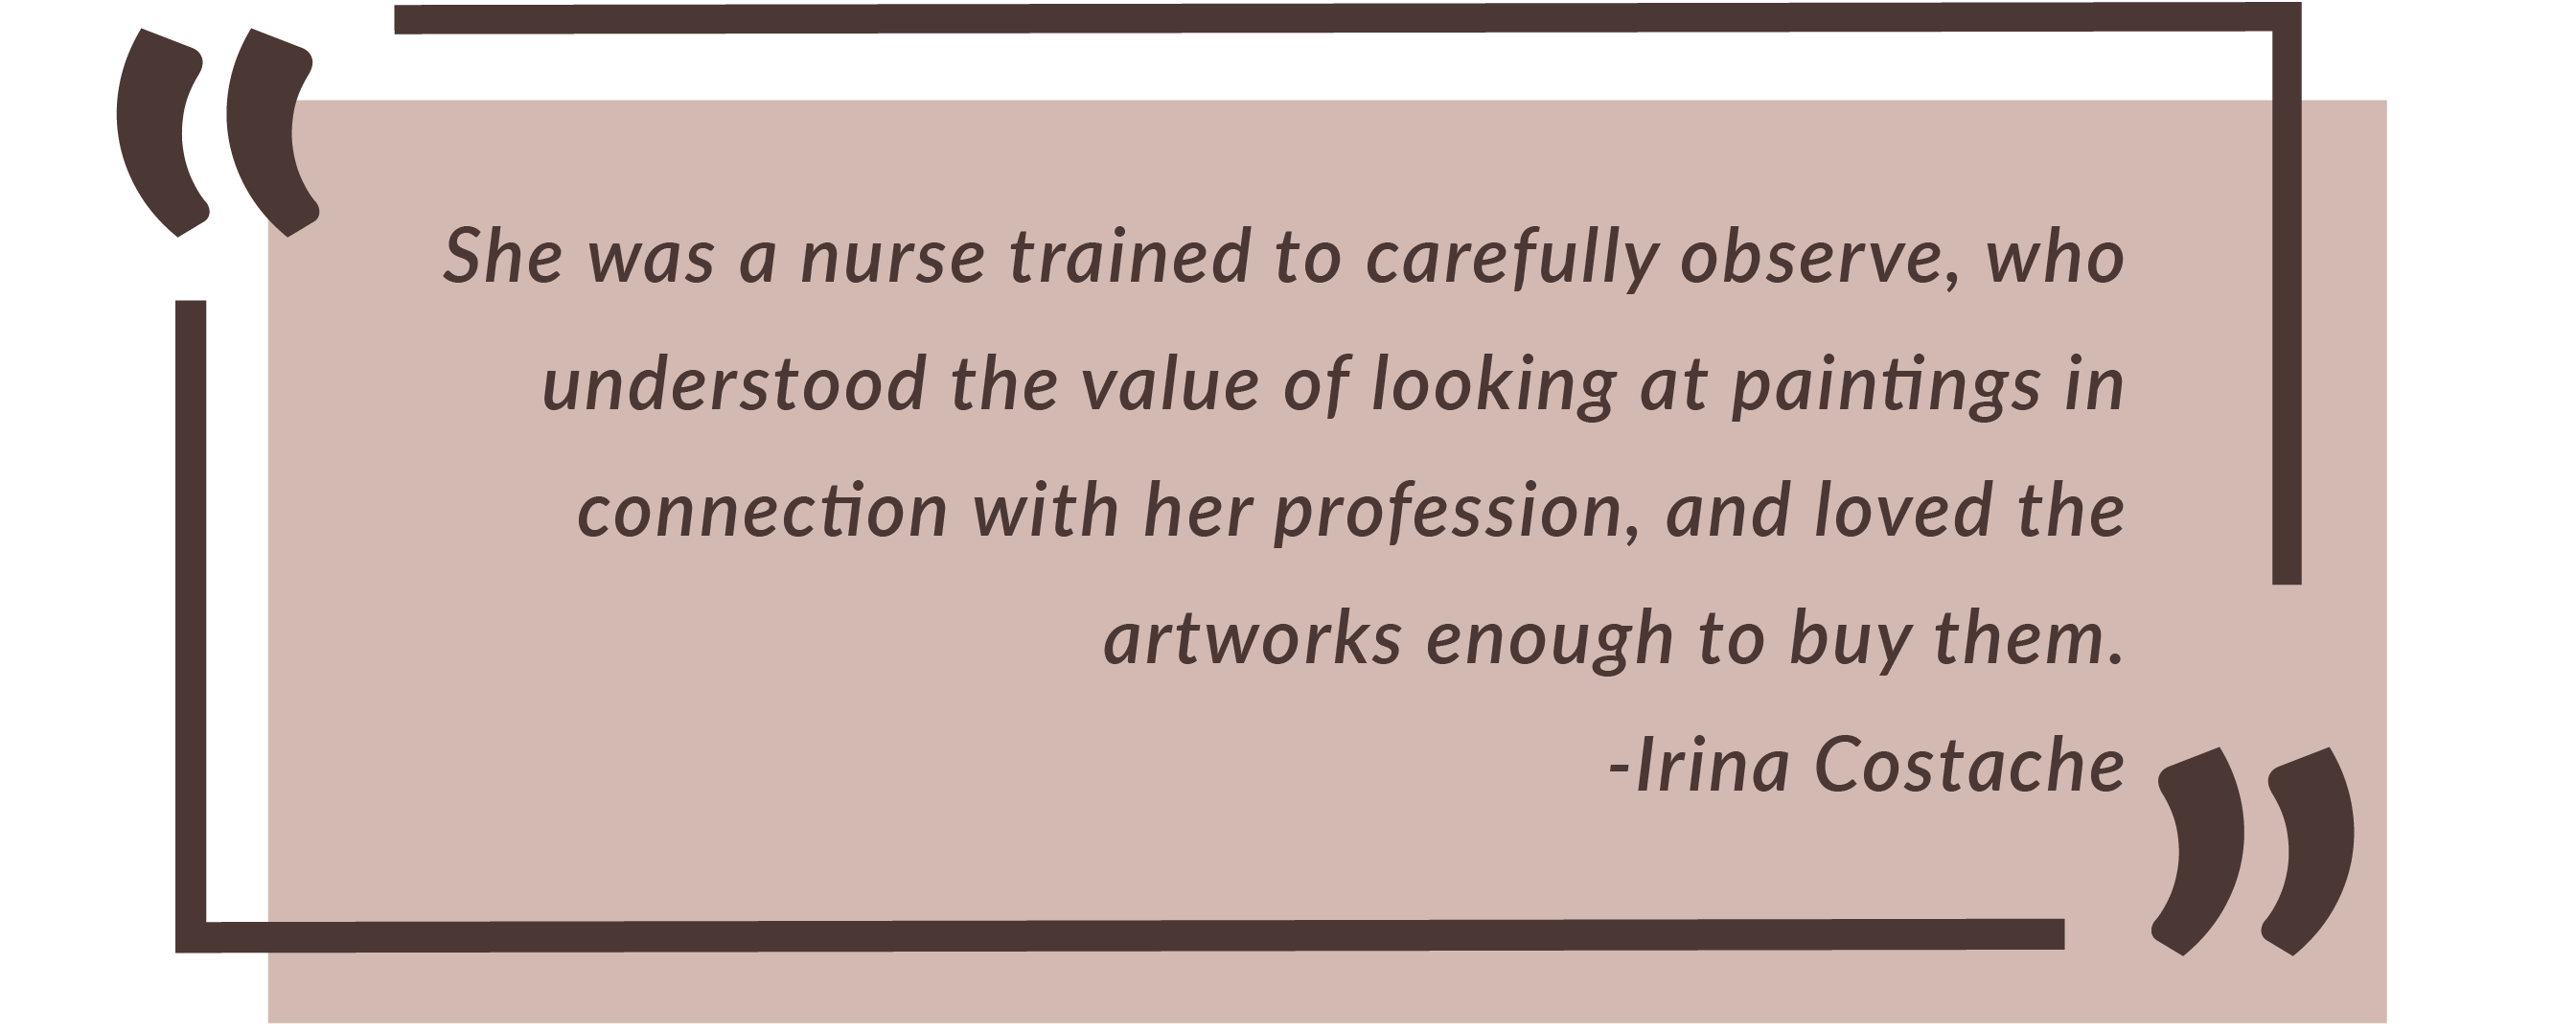 She was a nurse trained to carefully observe., who understood the value of looking at paintings in connection with her profession, and loved the artworks enough to buy them. -Irina Costache